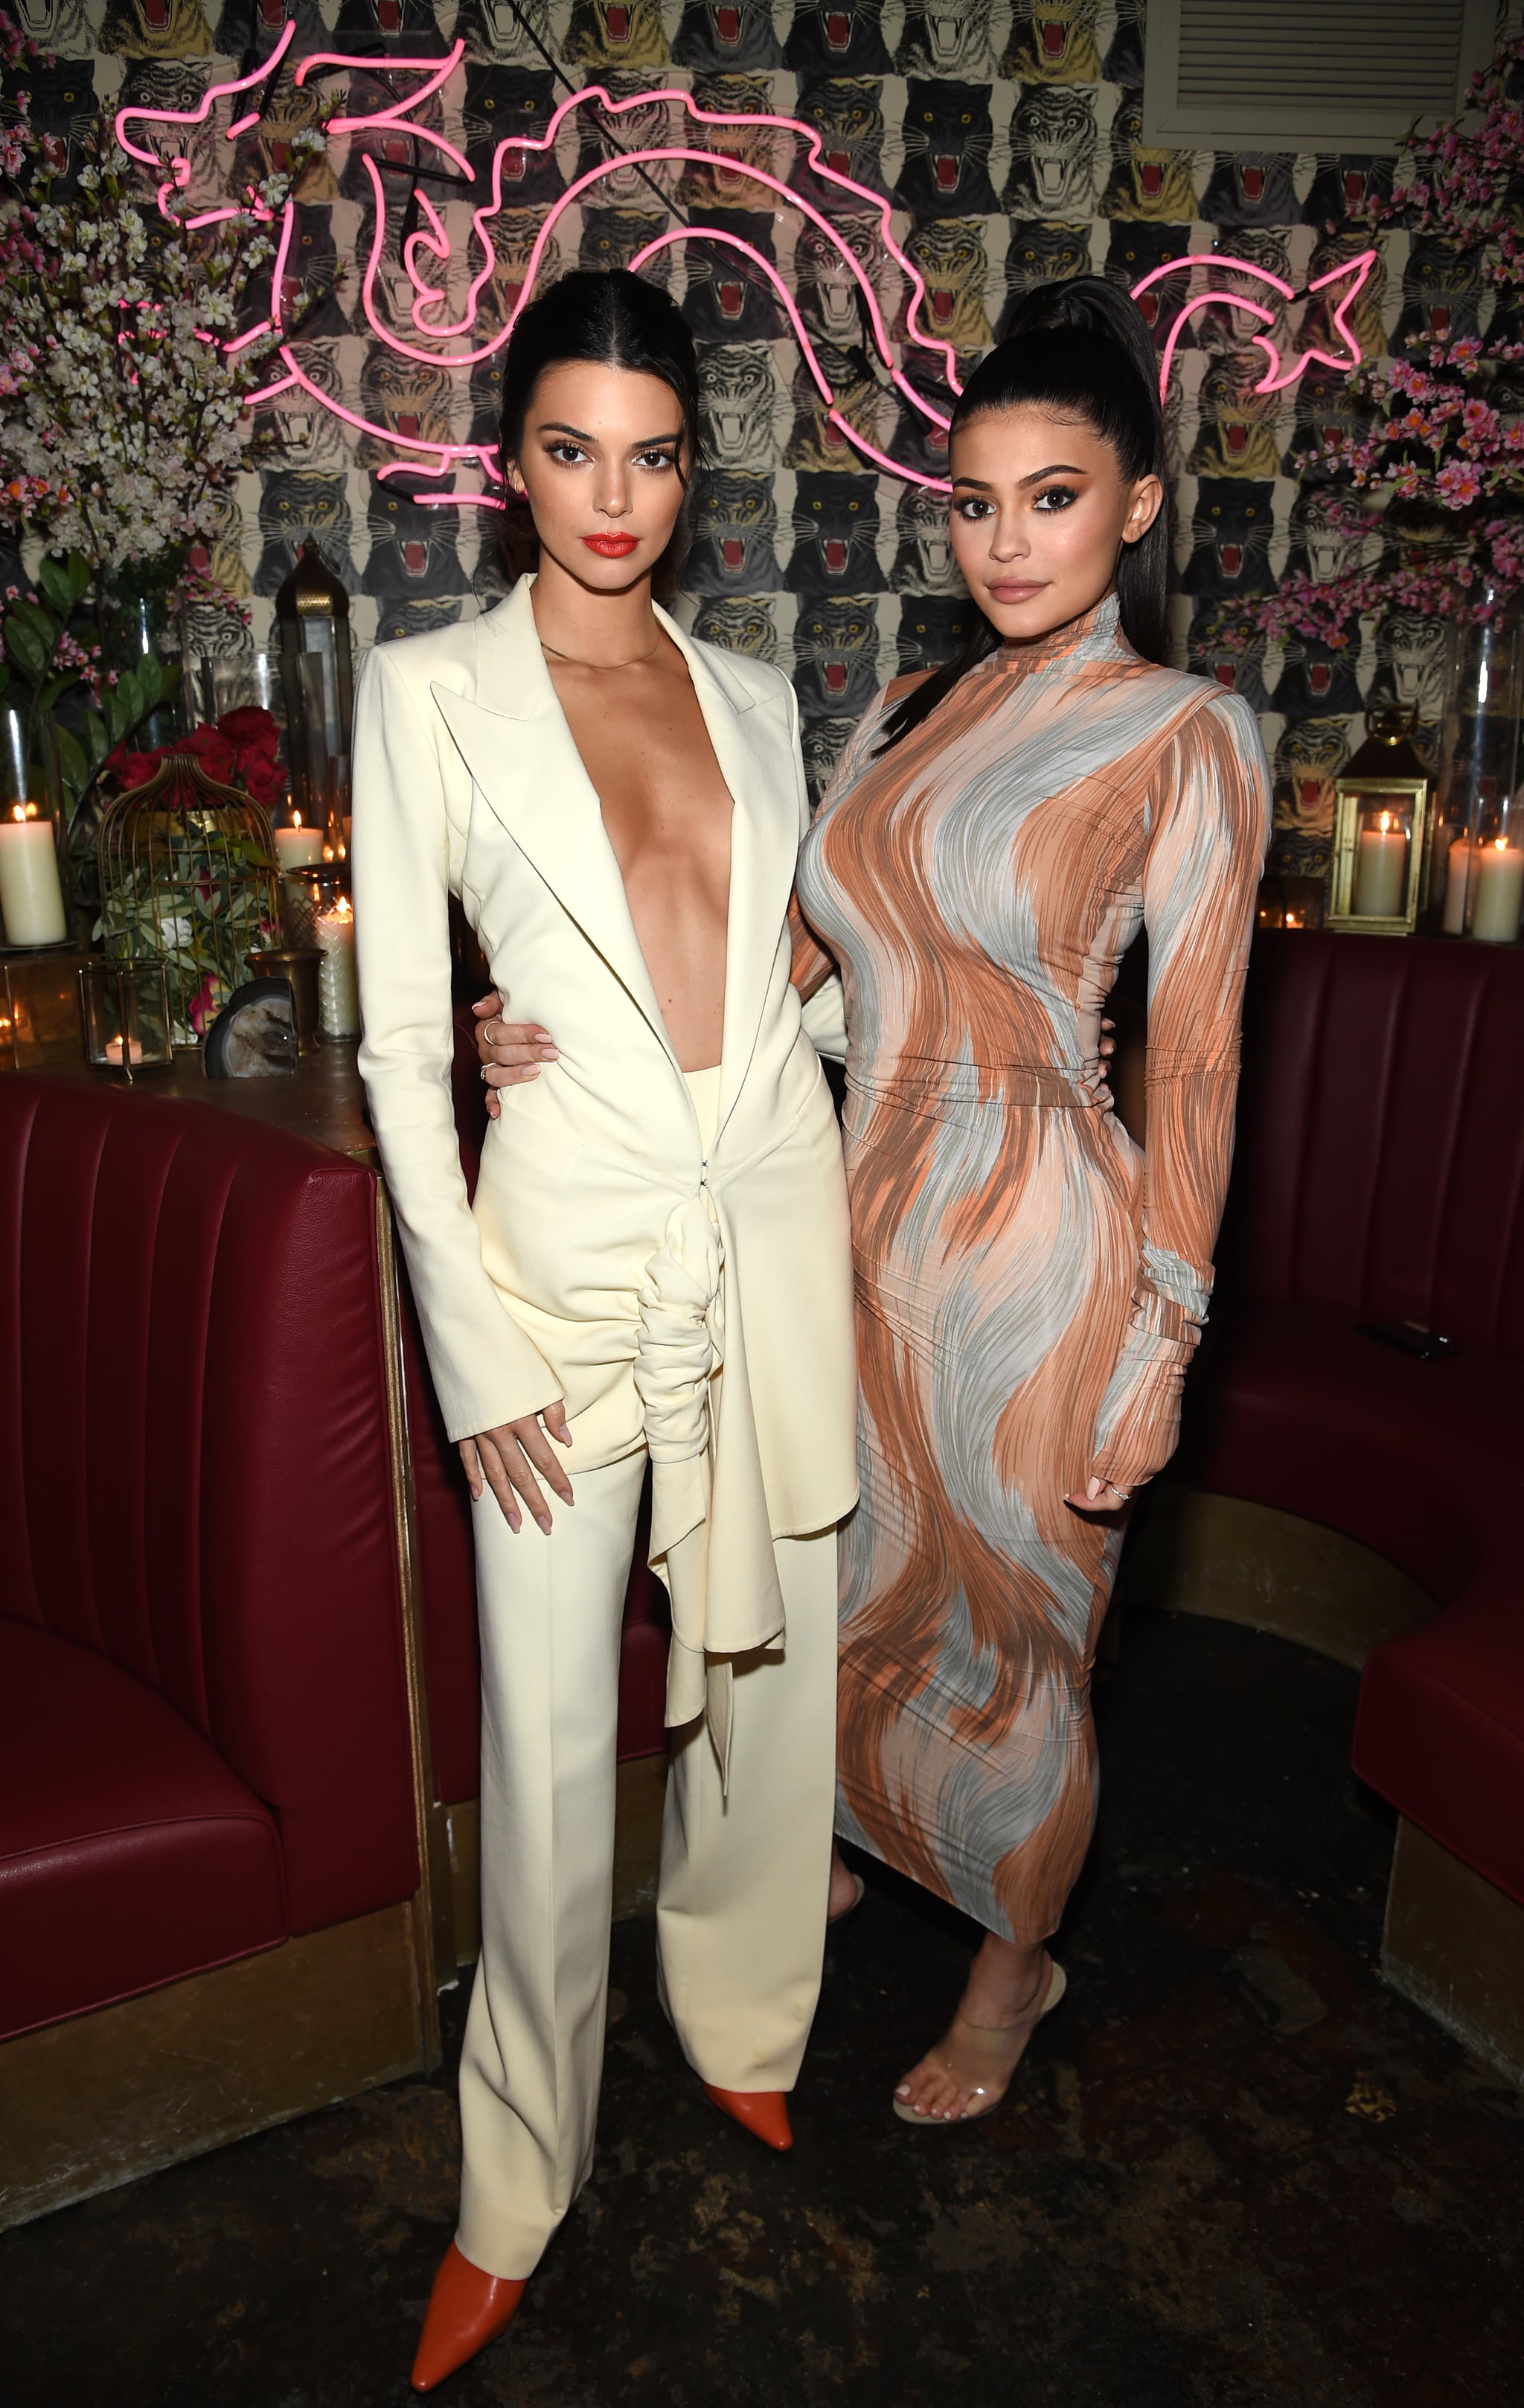 NEW YORK, NY - MAY 08:  (L-R) Model Kendall Jenner and Founder, Kylie Cosmetics Kylie Jenner attend an intimate dinner hosted by The Business of Fashion to celebrate its latest special print edition 'The Age of Influence' at Peachy's/Chinese Tuxedo on May 8, 2018 in New York City.  (Photo by Dimitrios Kambouris/Getty Images for The Business of Fashion)